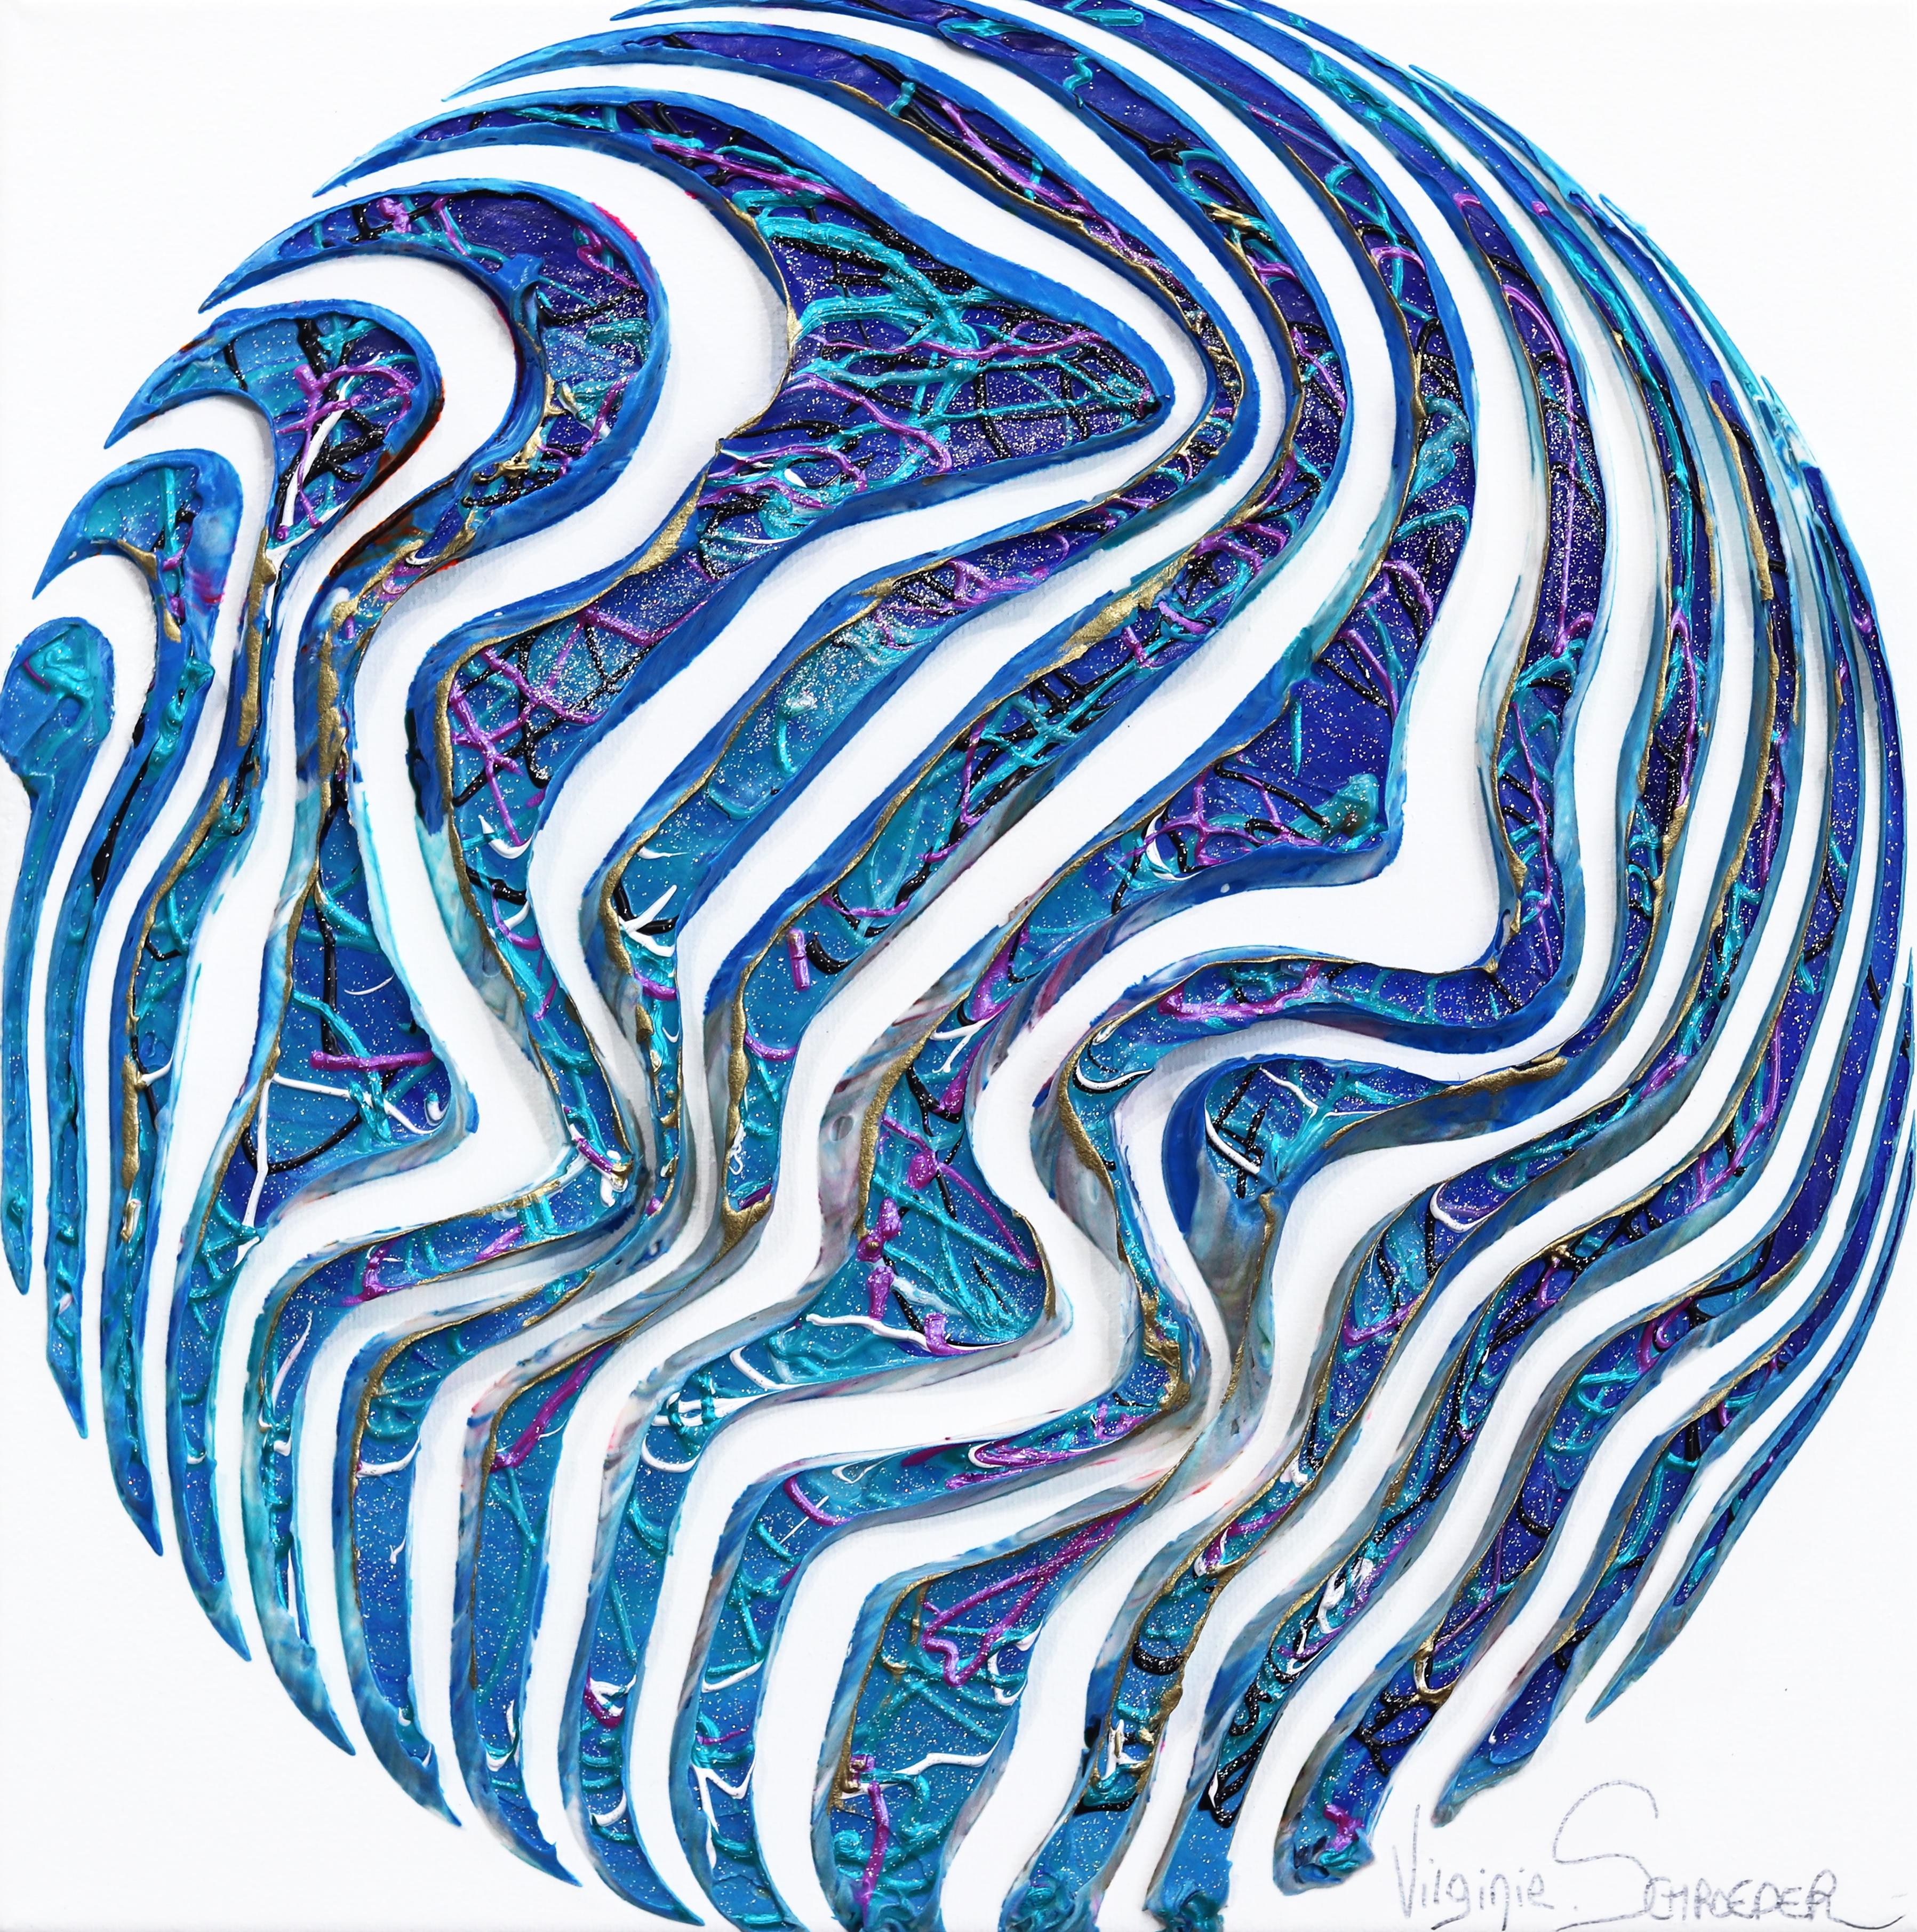 The Waves and the Life - Minimalist Abstract 3D Textural Blue Circle Painting